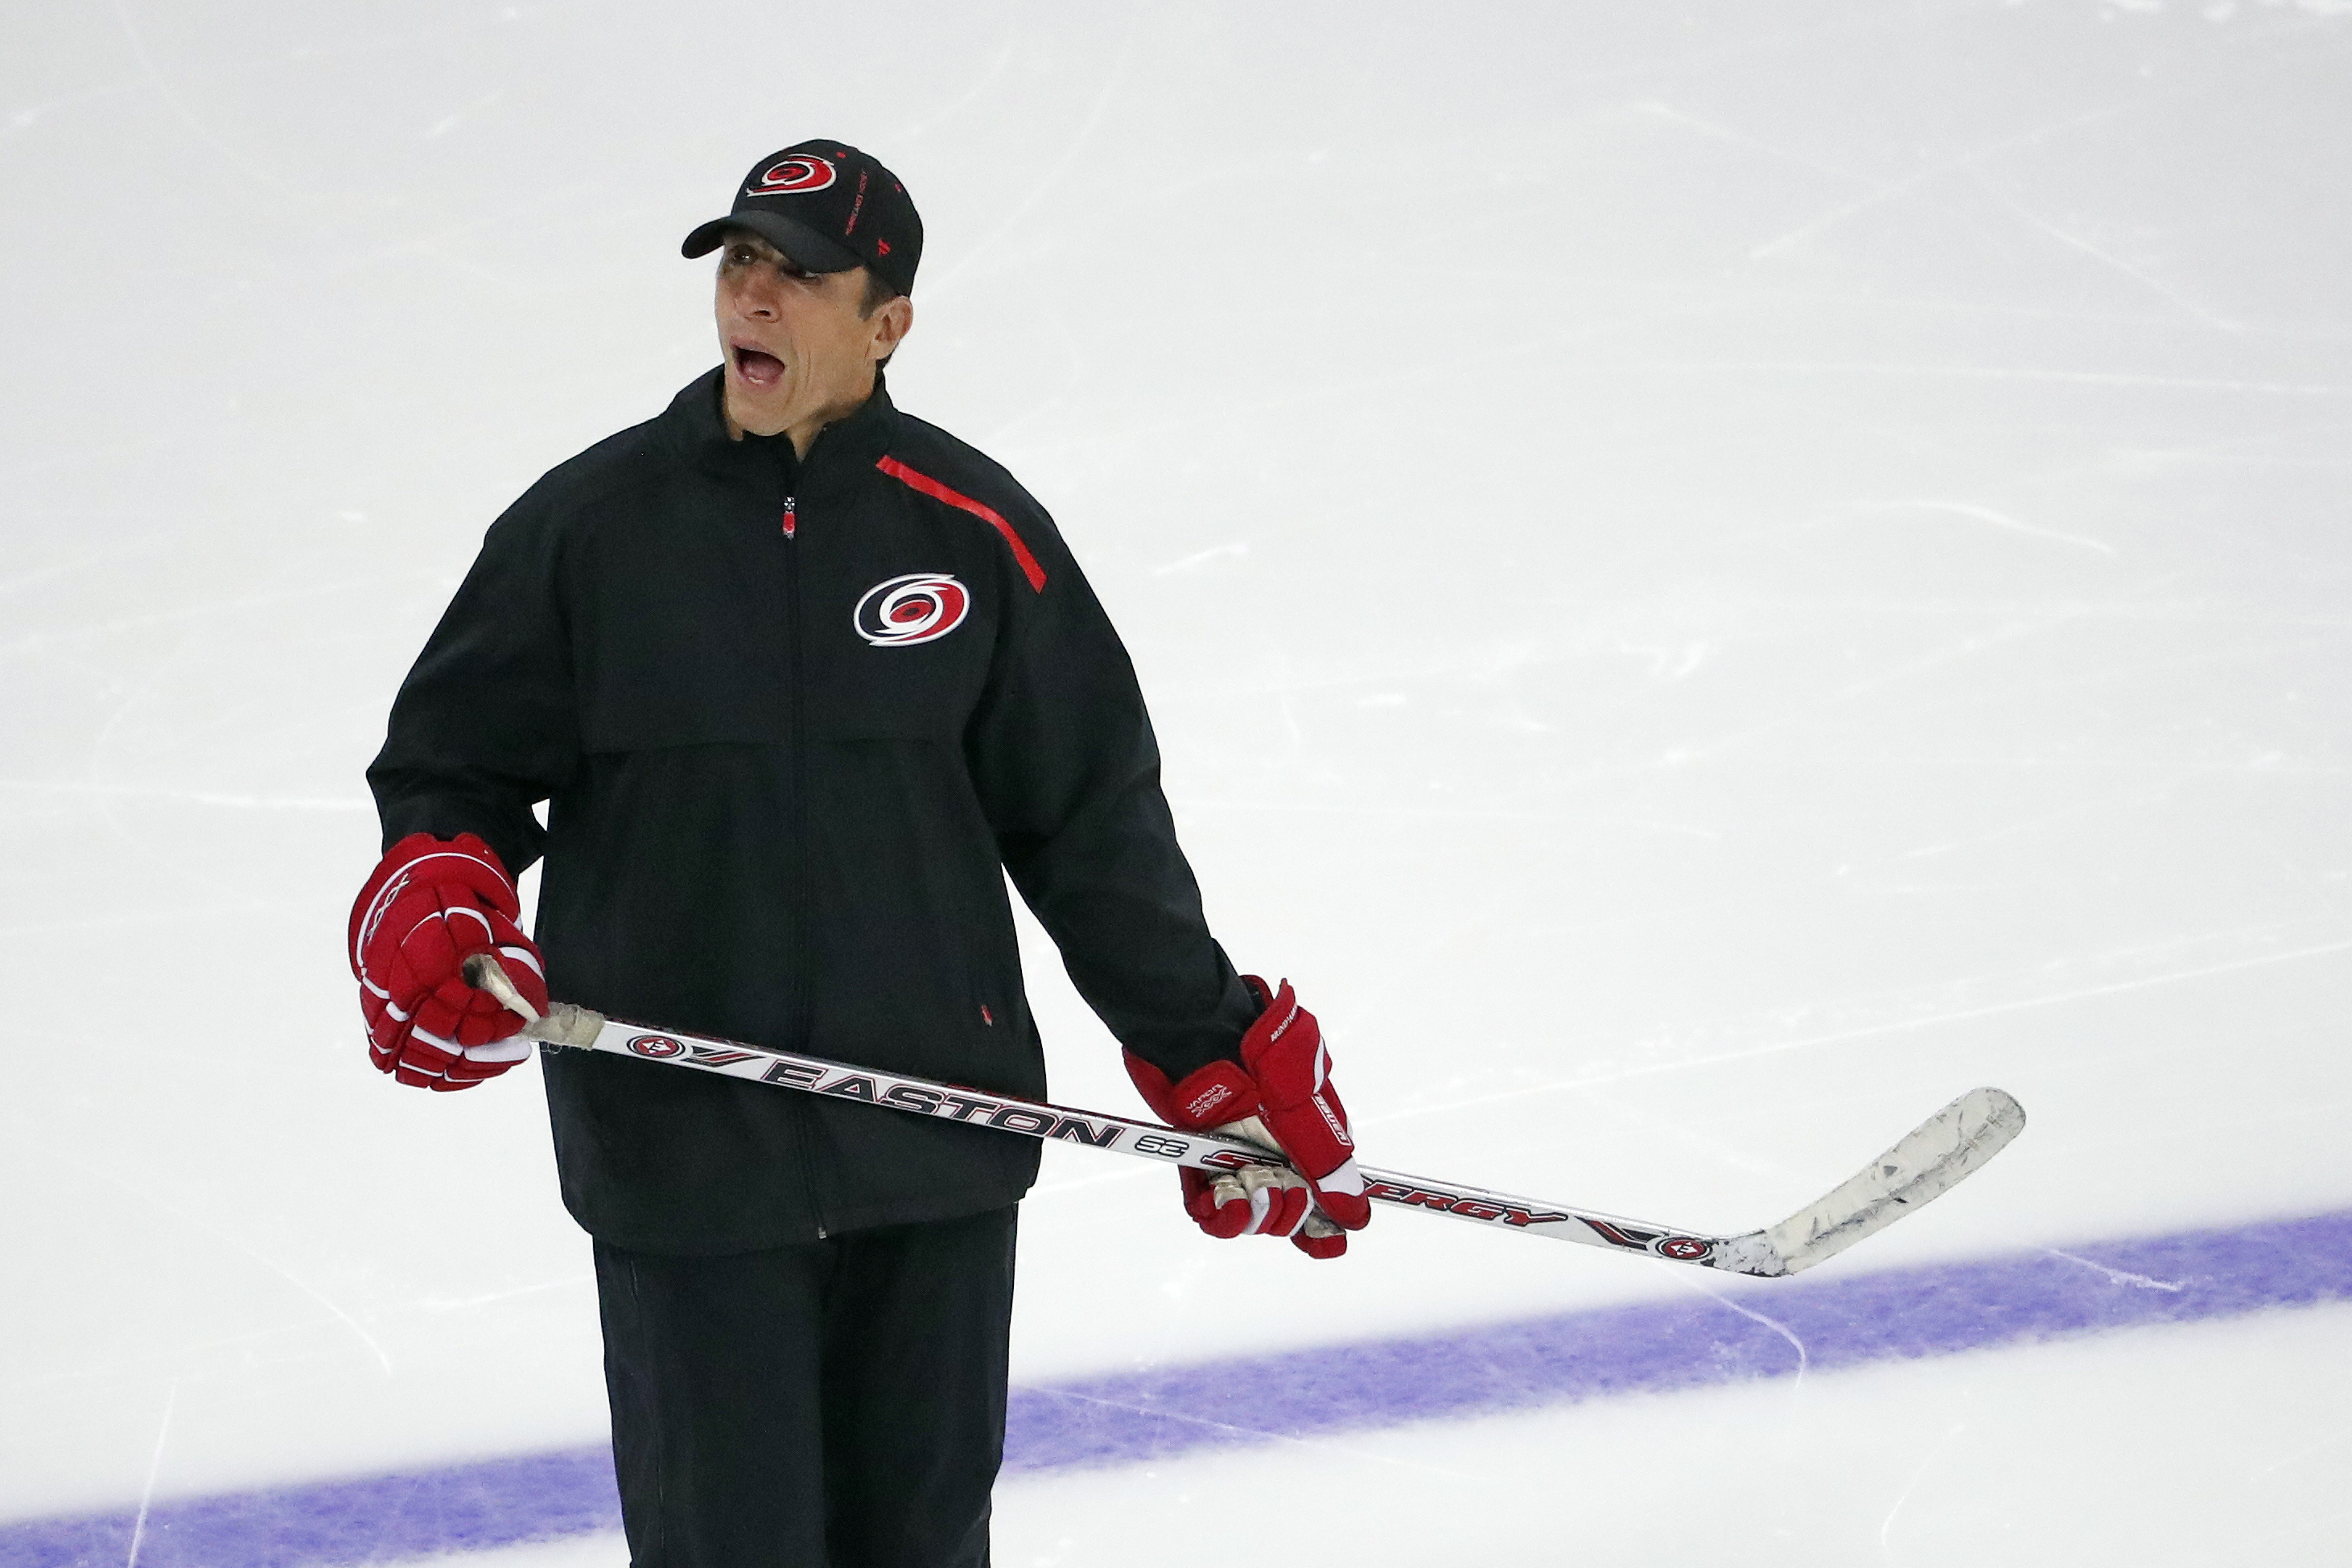 Worst way to lose': Brind'Amour hopes Hurricanes can regroup after Game 1  heartbreaker